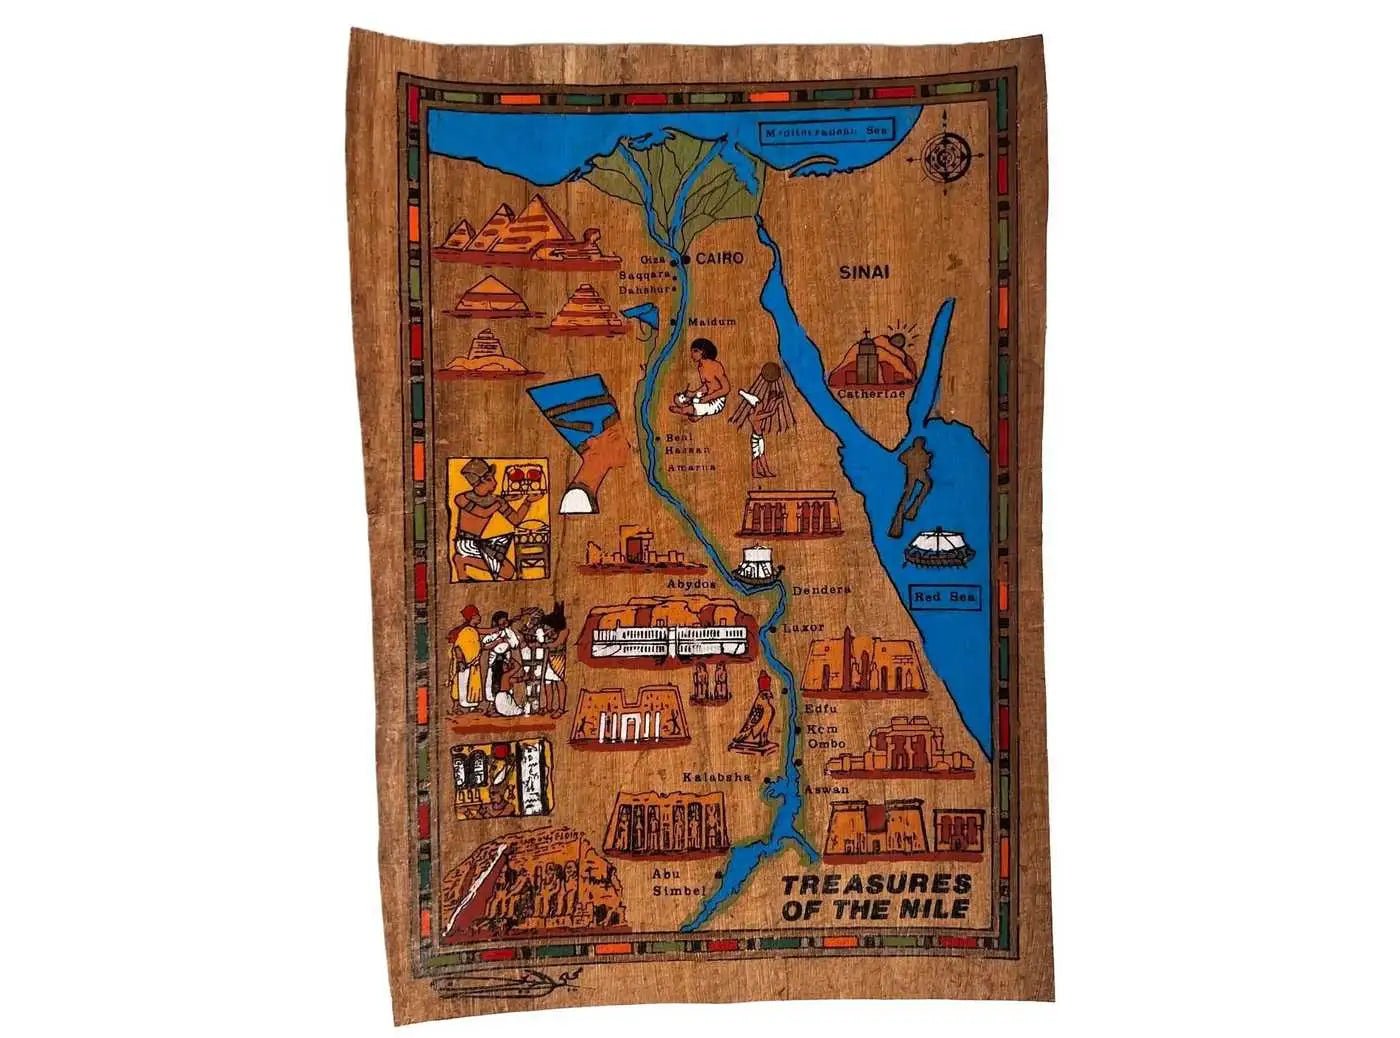 Illustrated Map of Ancient Egypt Treasures of Nile on Brown Papyrus Printing on Egyptian Papyrus